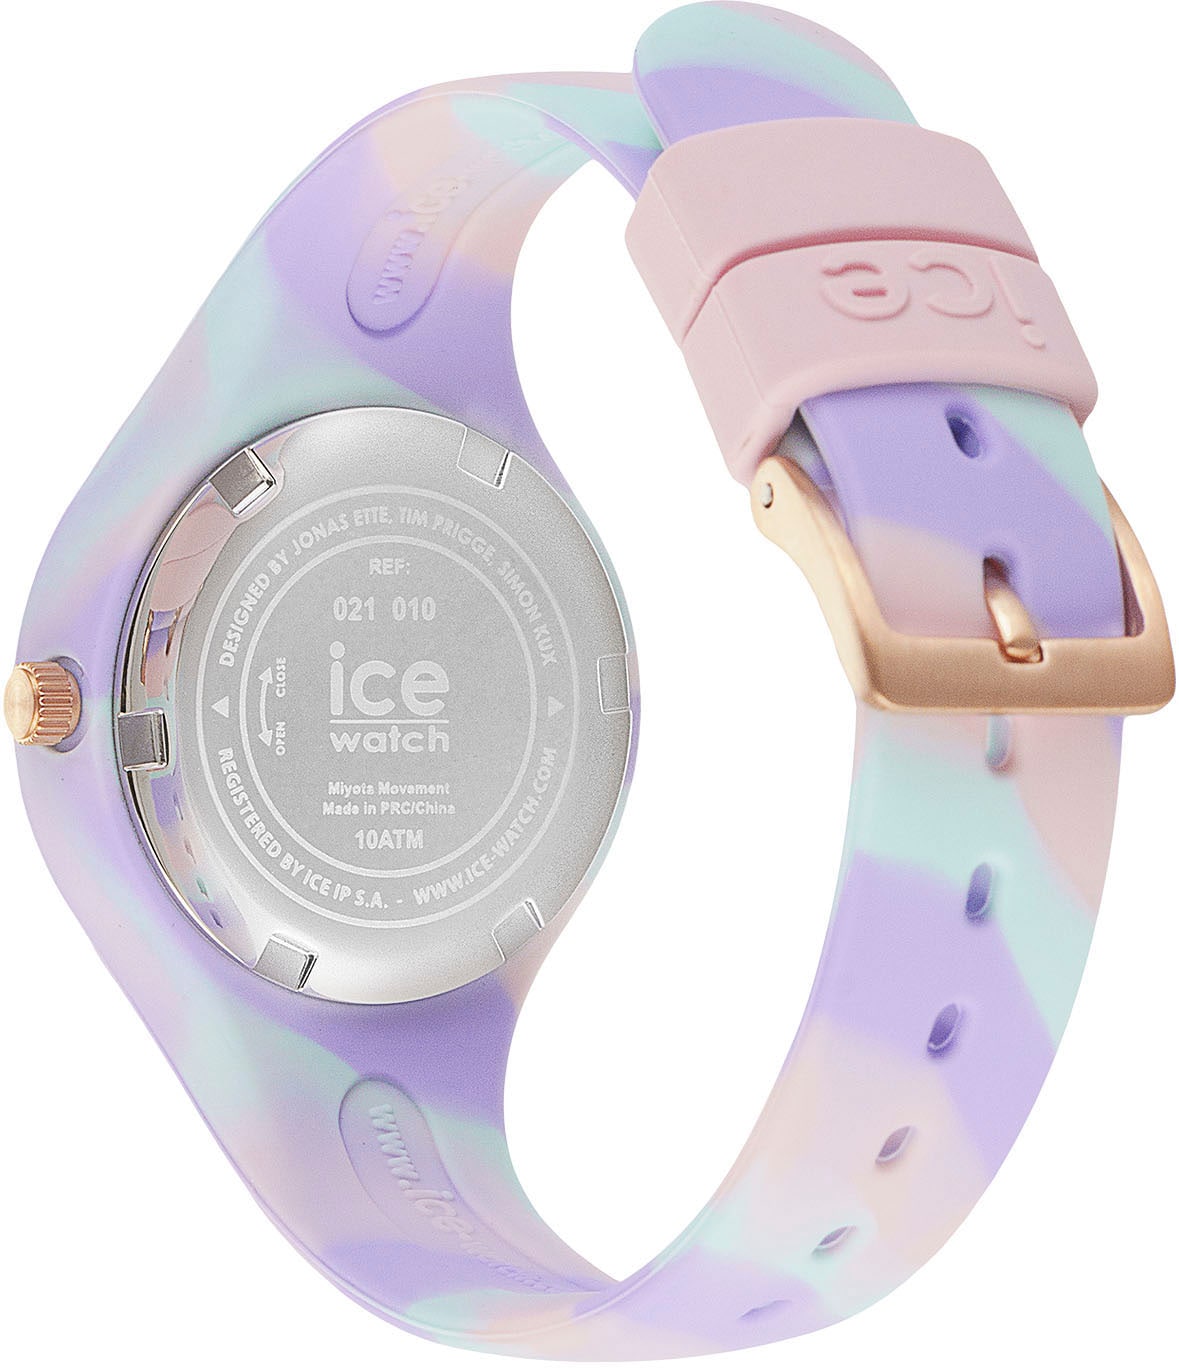 dye and | »ICE - 021010« 3H, Sweet BAUR Extra-Small tie - Quarzuhr ice-watch - lilac